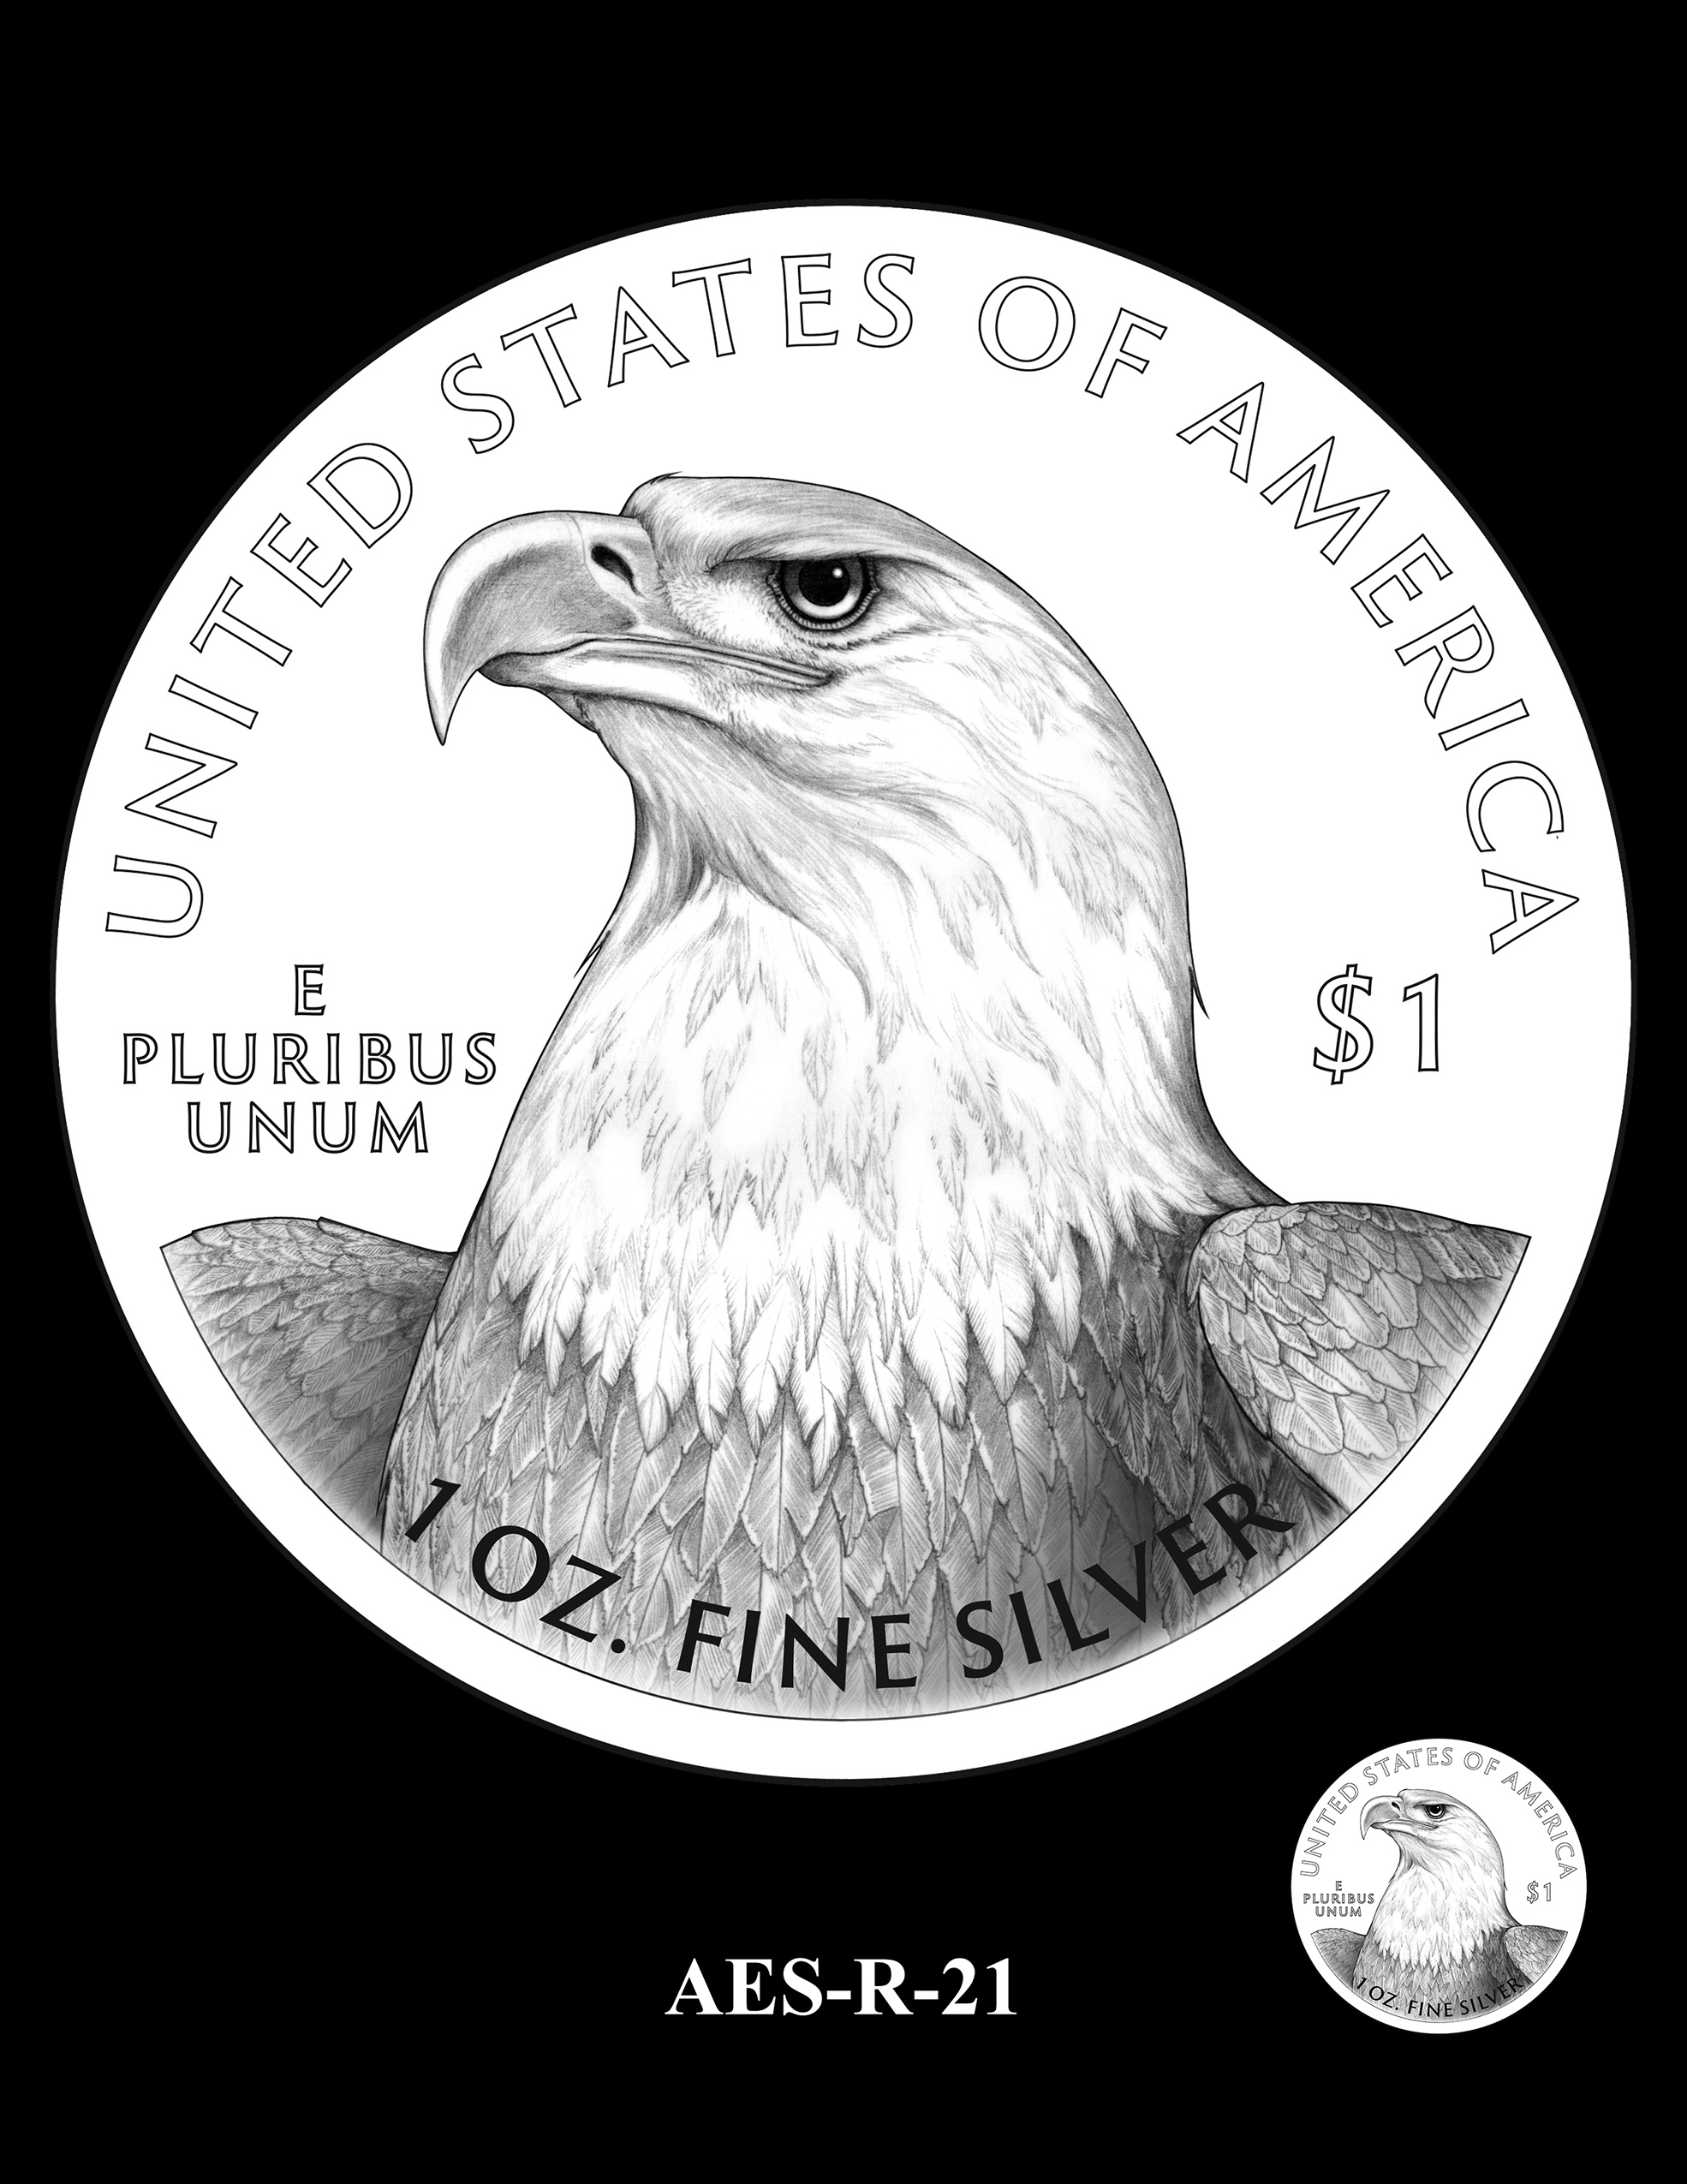 AES-R-21 -- American Eagle Proof and Bullion Silver Coin - Reverse